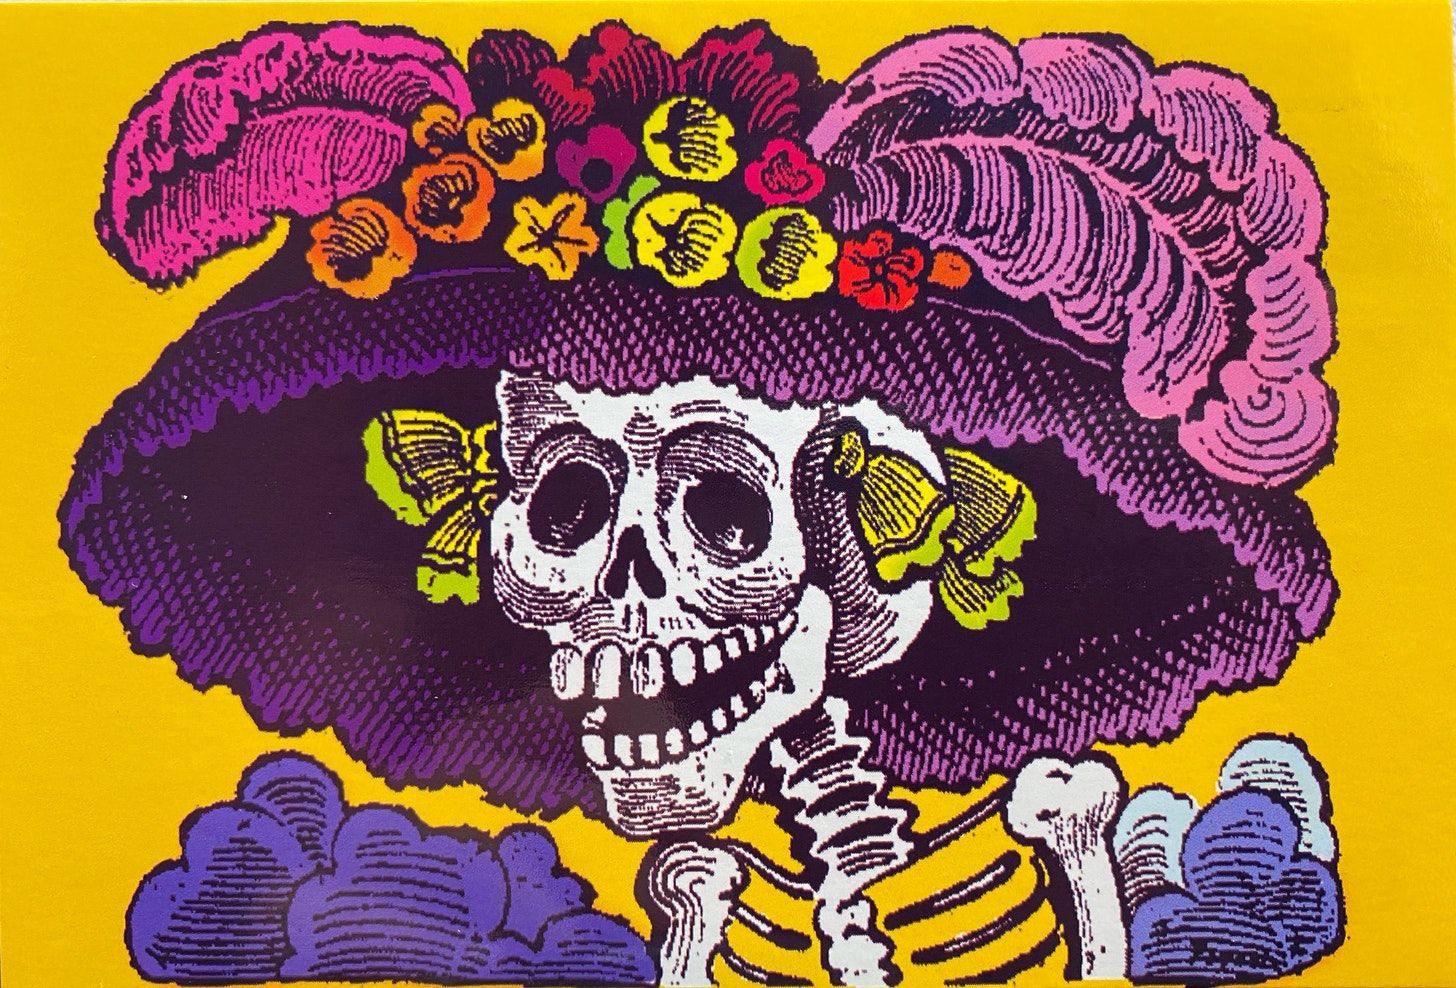 Portrait of a skeleton wearing a wide hat with plumage and flowers on top.